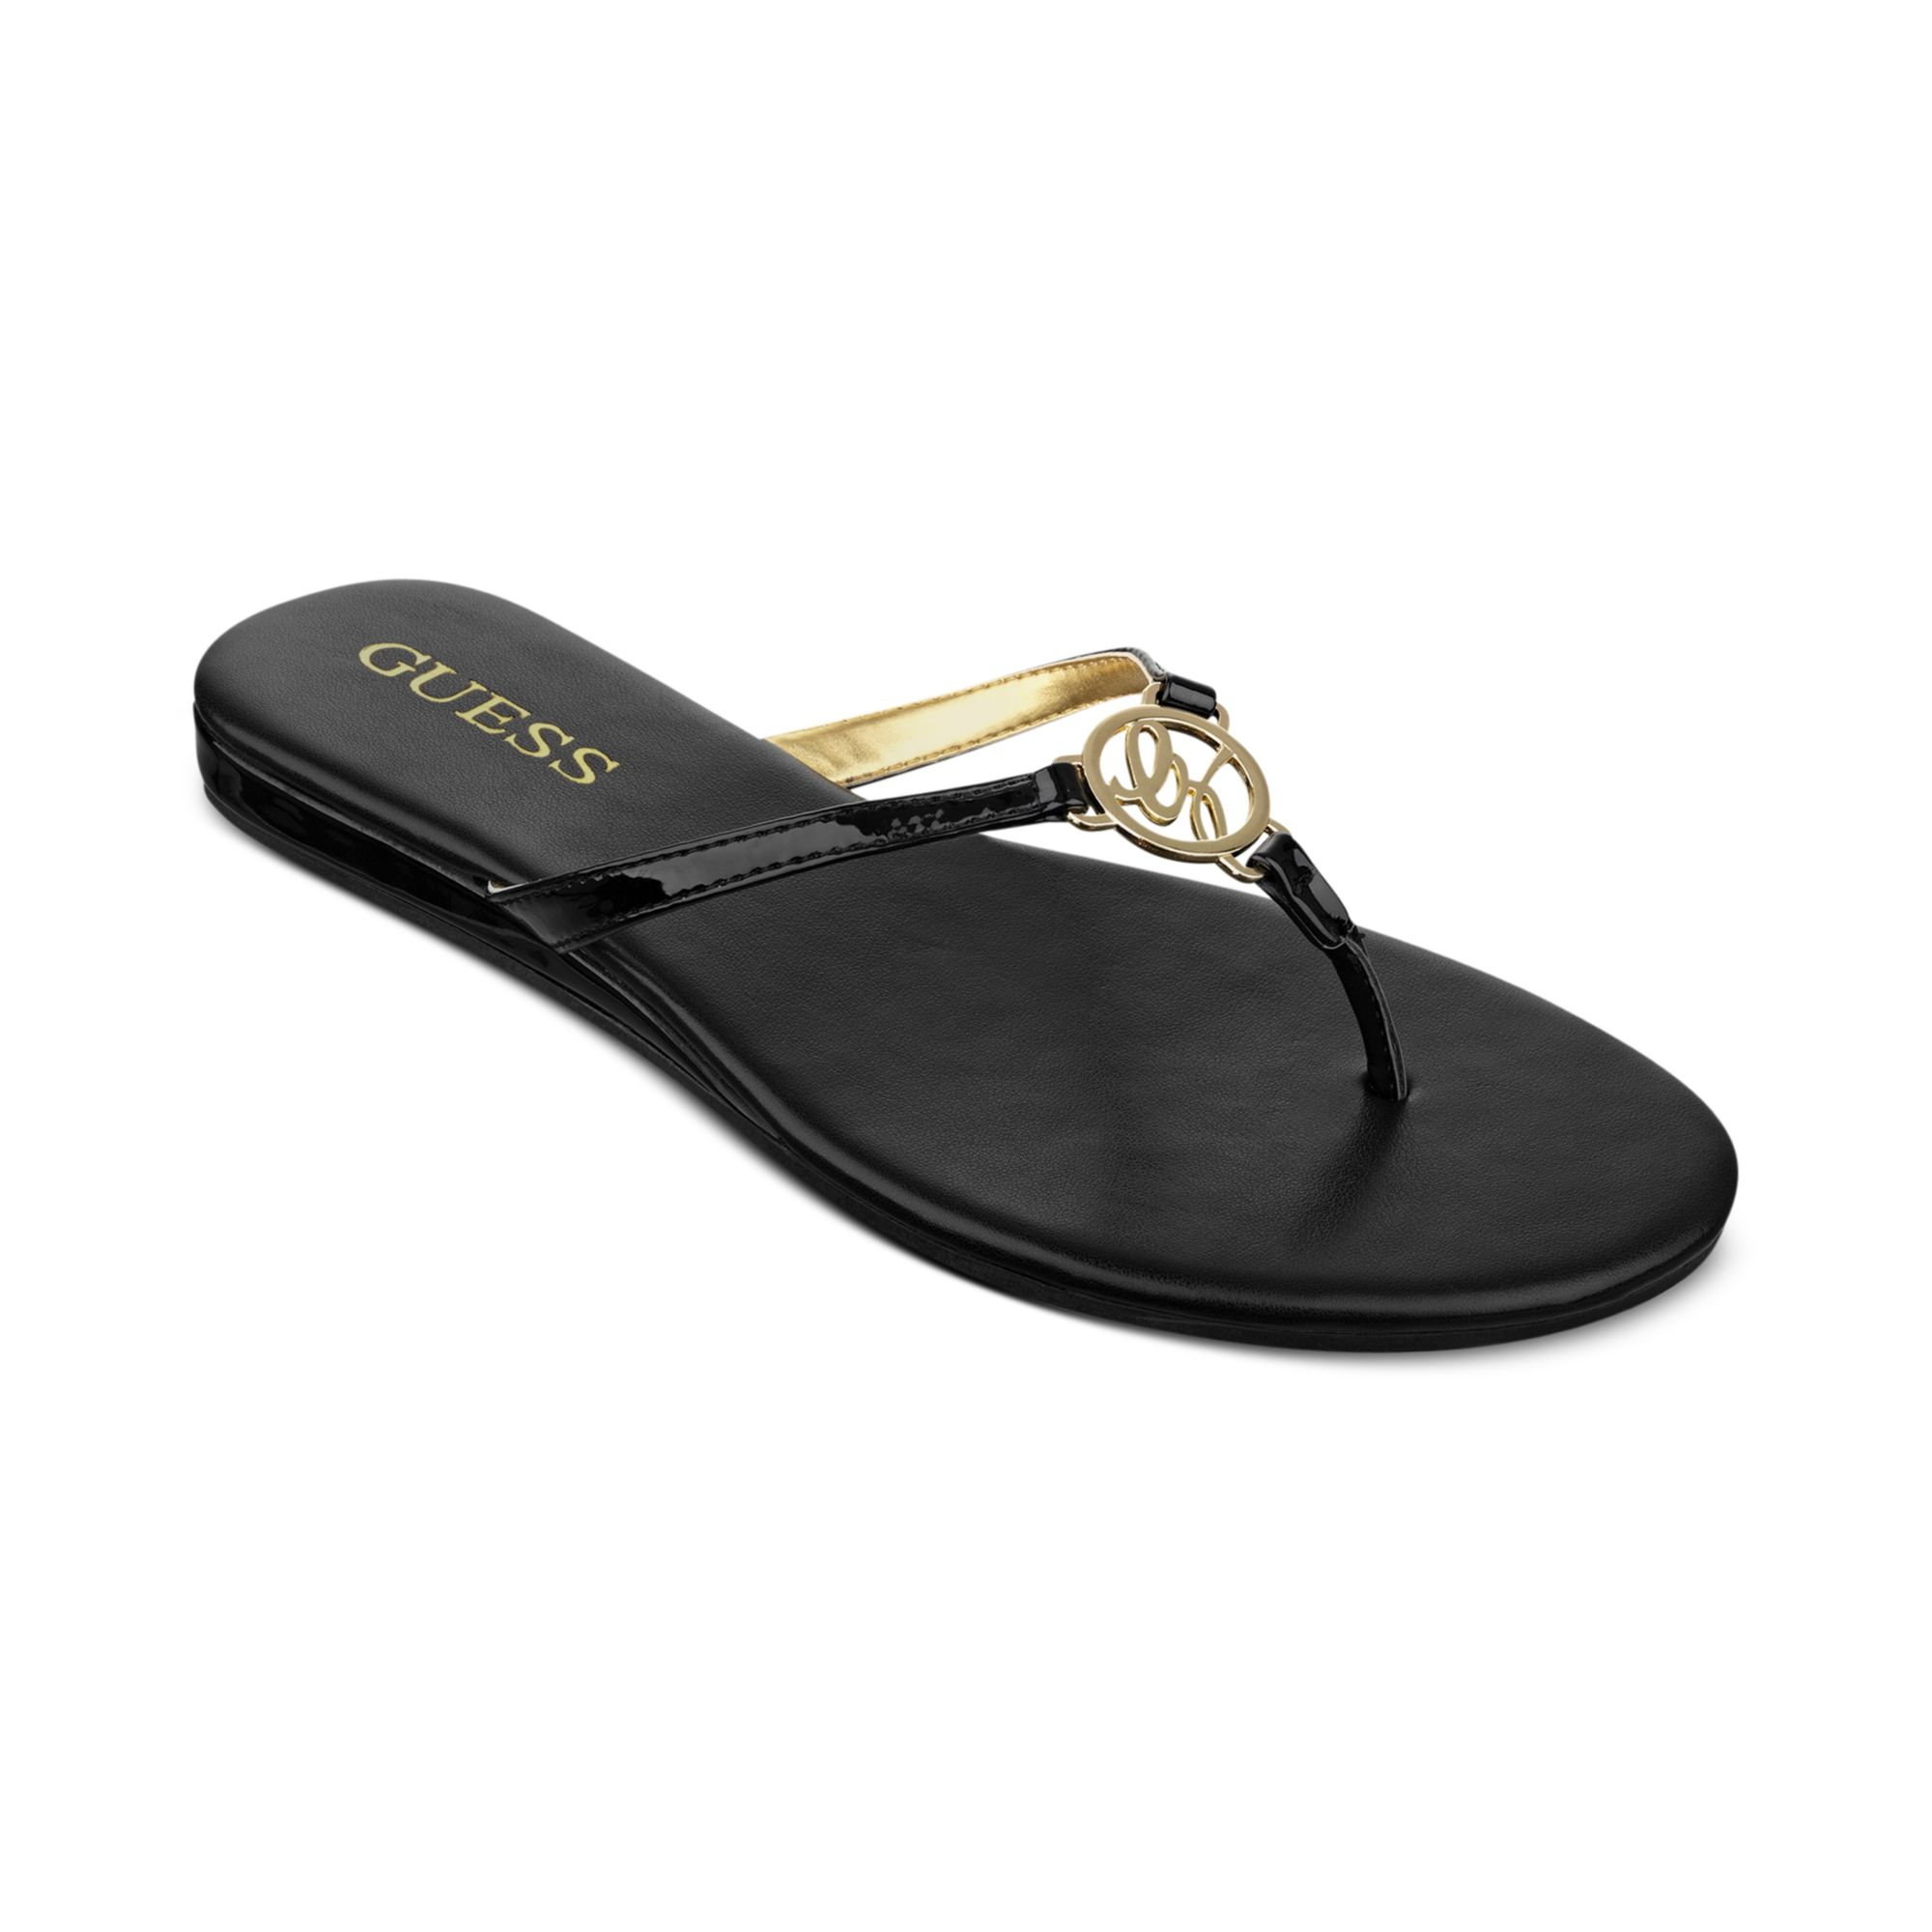 Guess Julsy Flat Thong Sandals in Black - Lyst